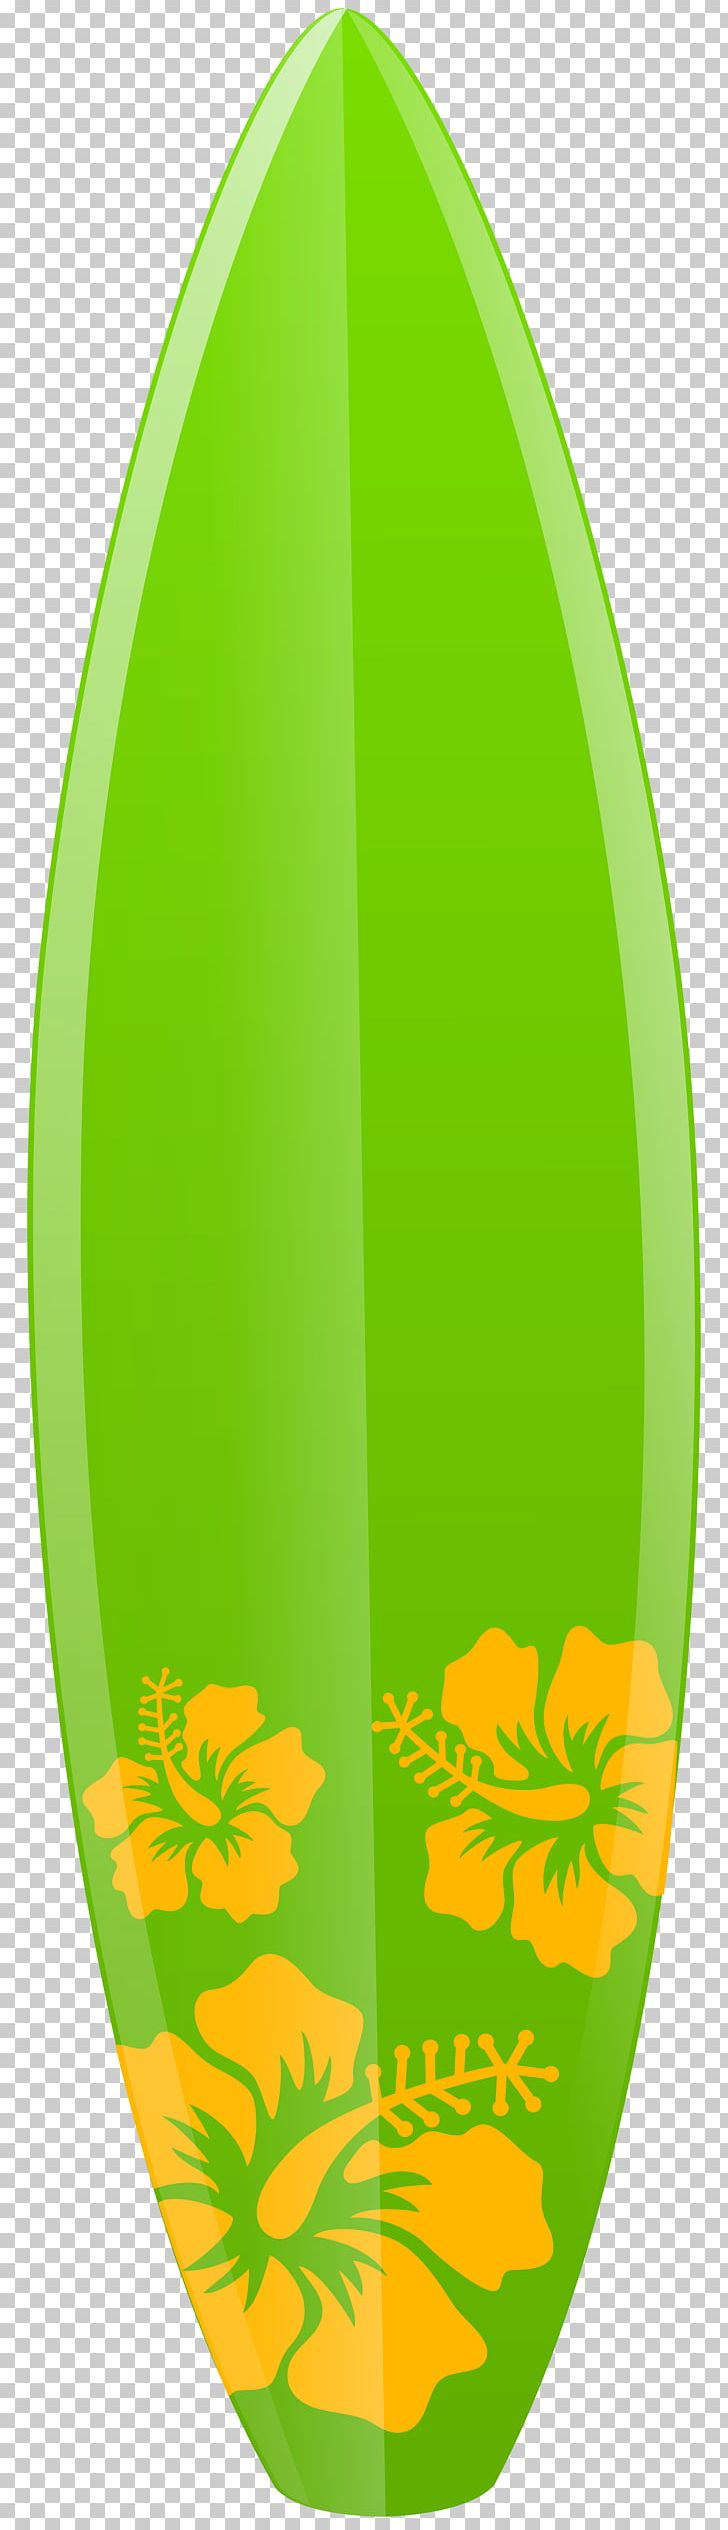 Surfboard Surfing PNG, Clipart, Circle, Clip Art, Cricut, Grass, Green Free PNG Download